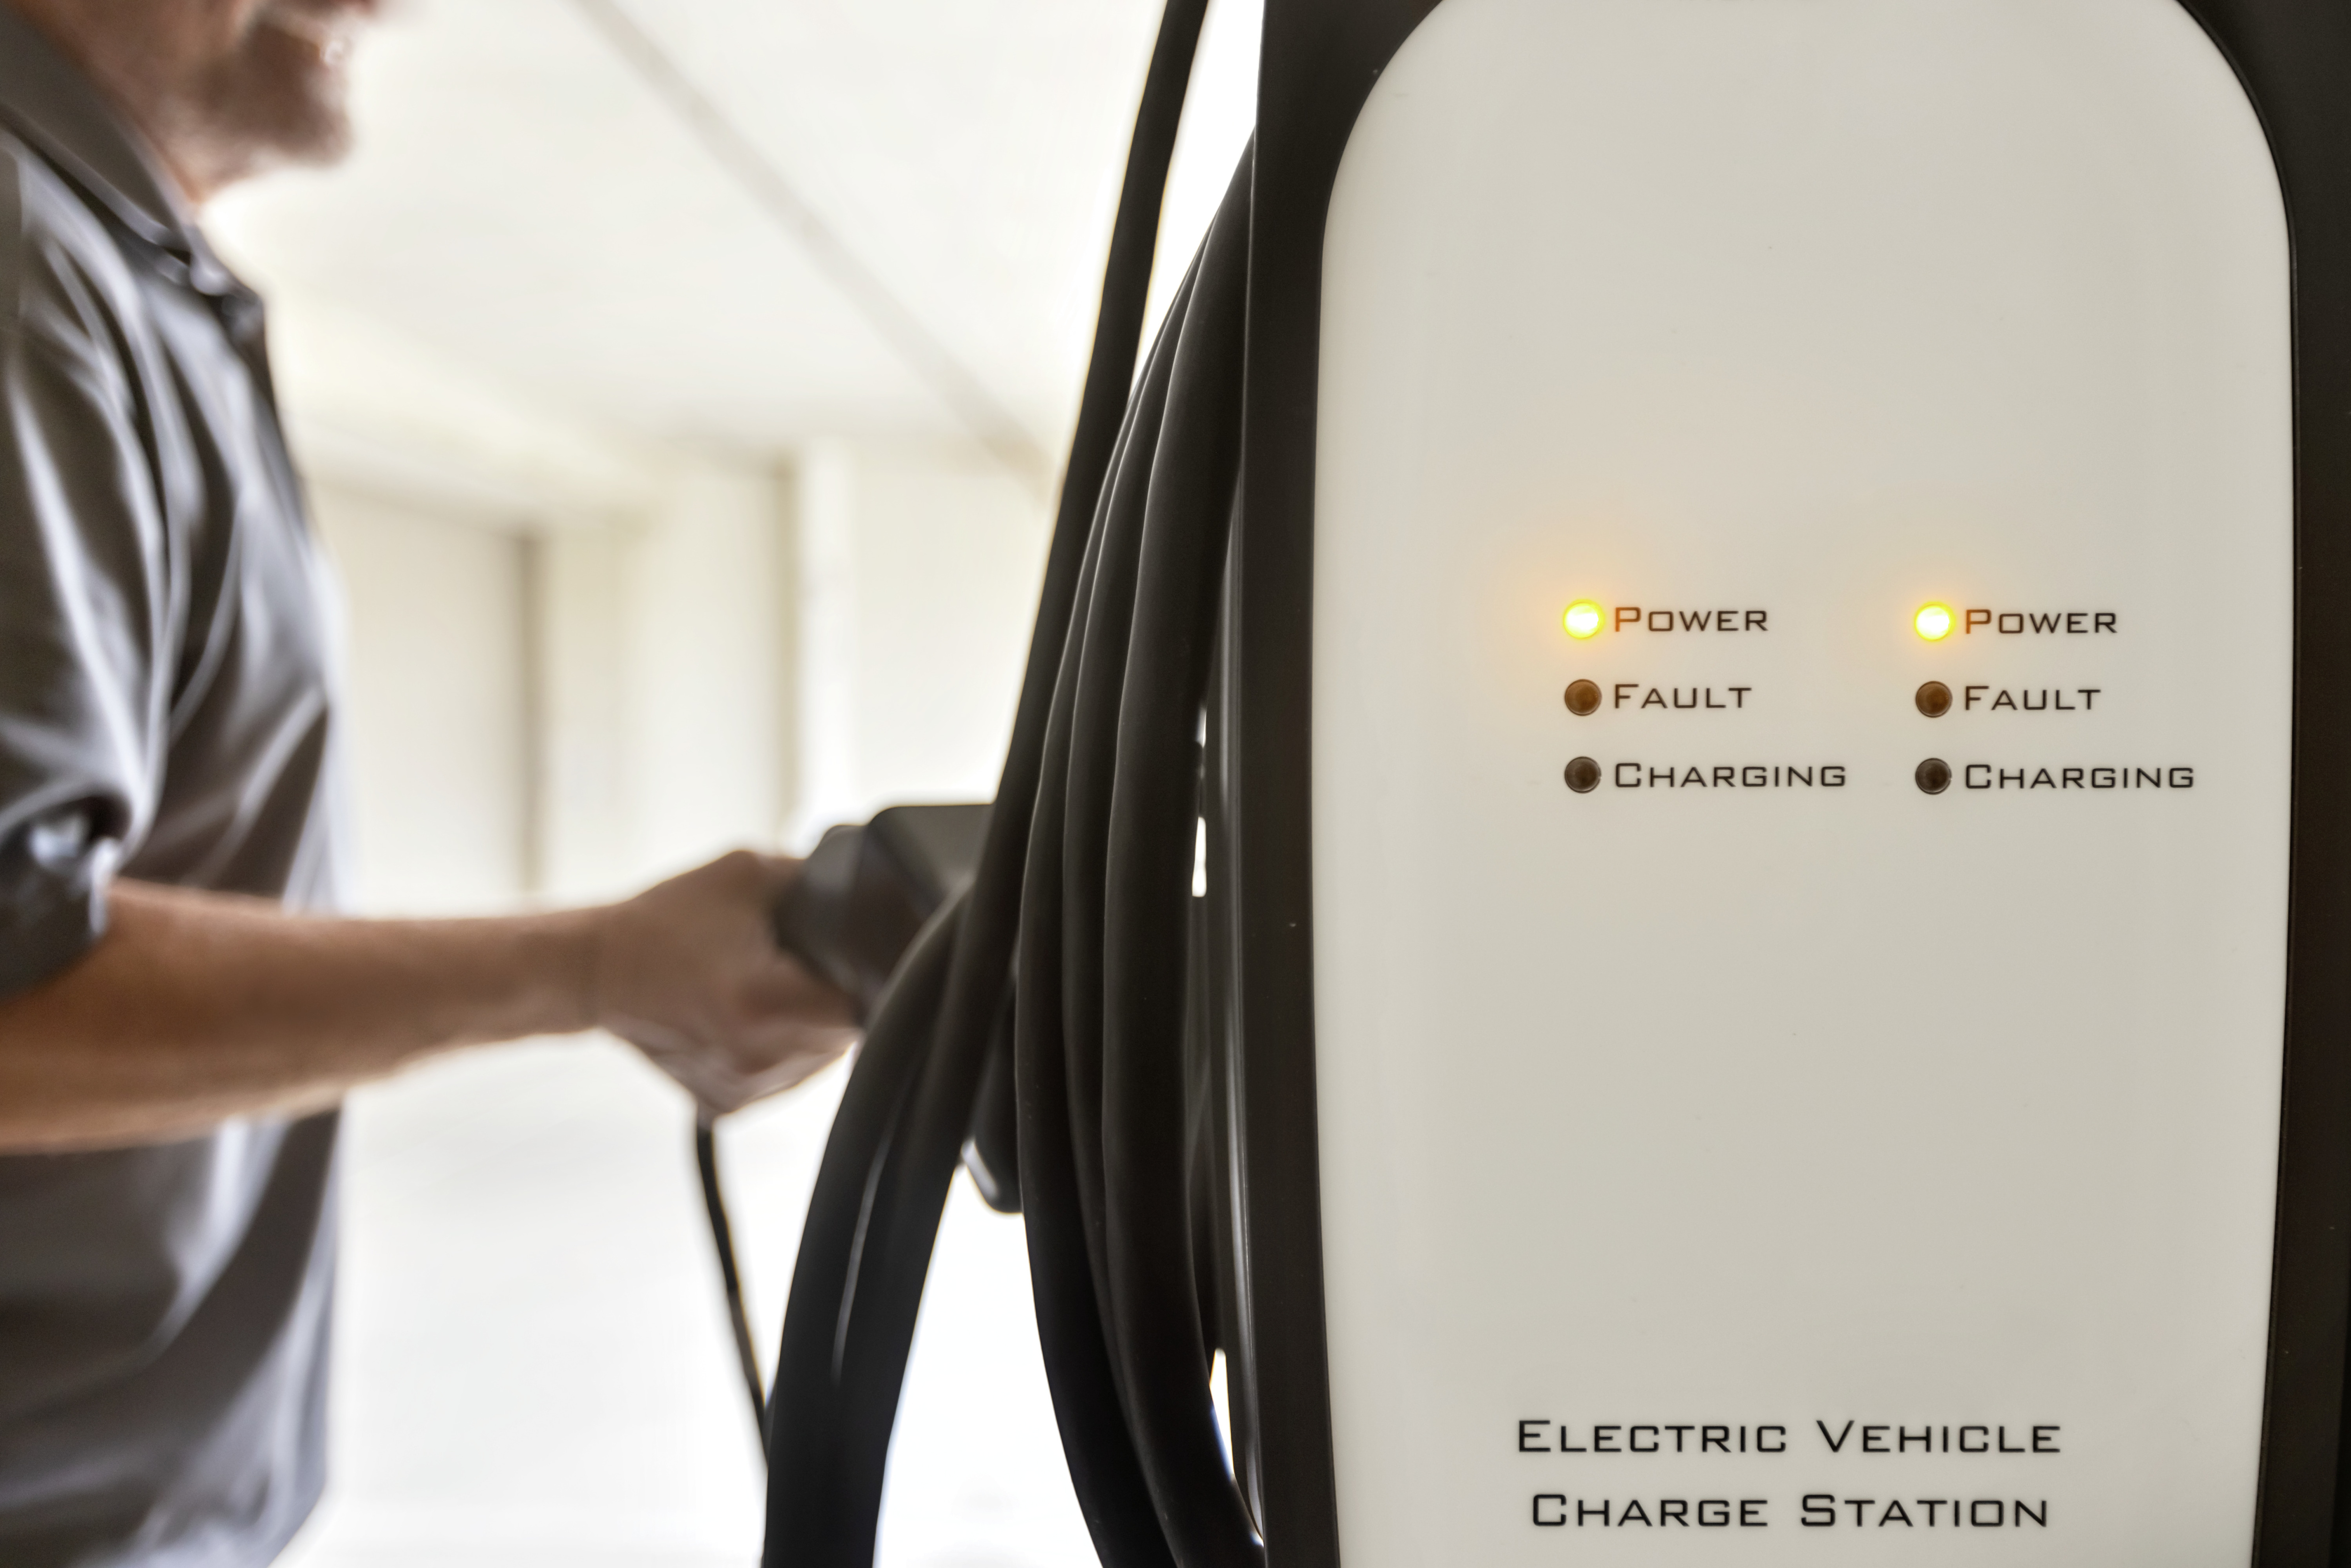 Convenient and eco-friendly complimentary electric car charging stations on site.